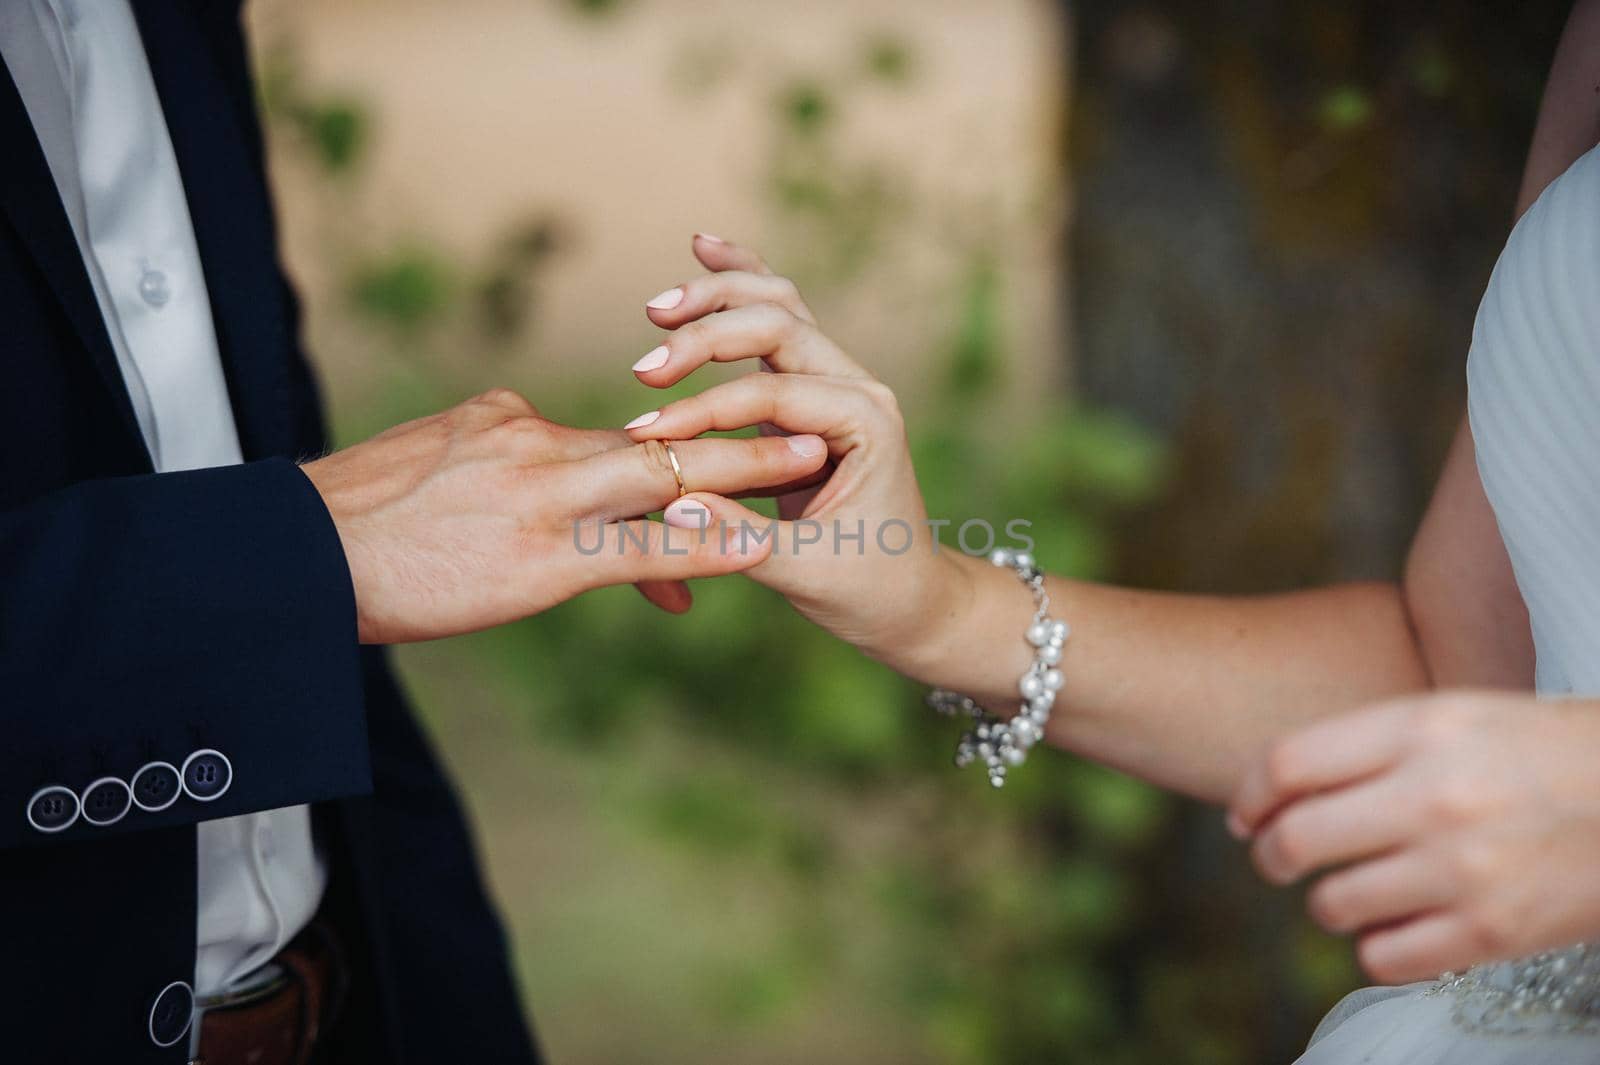 On the wedding day, the bride puts an engagement ring on the groom's finger by Lobachad